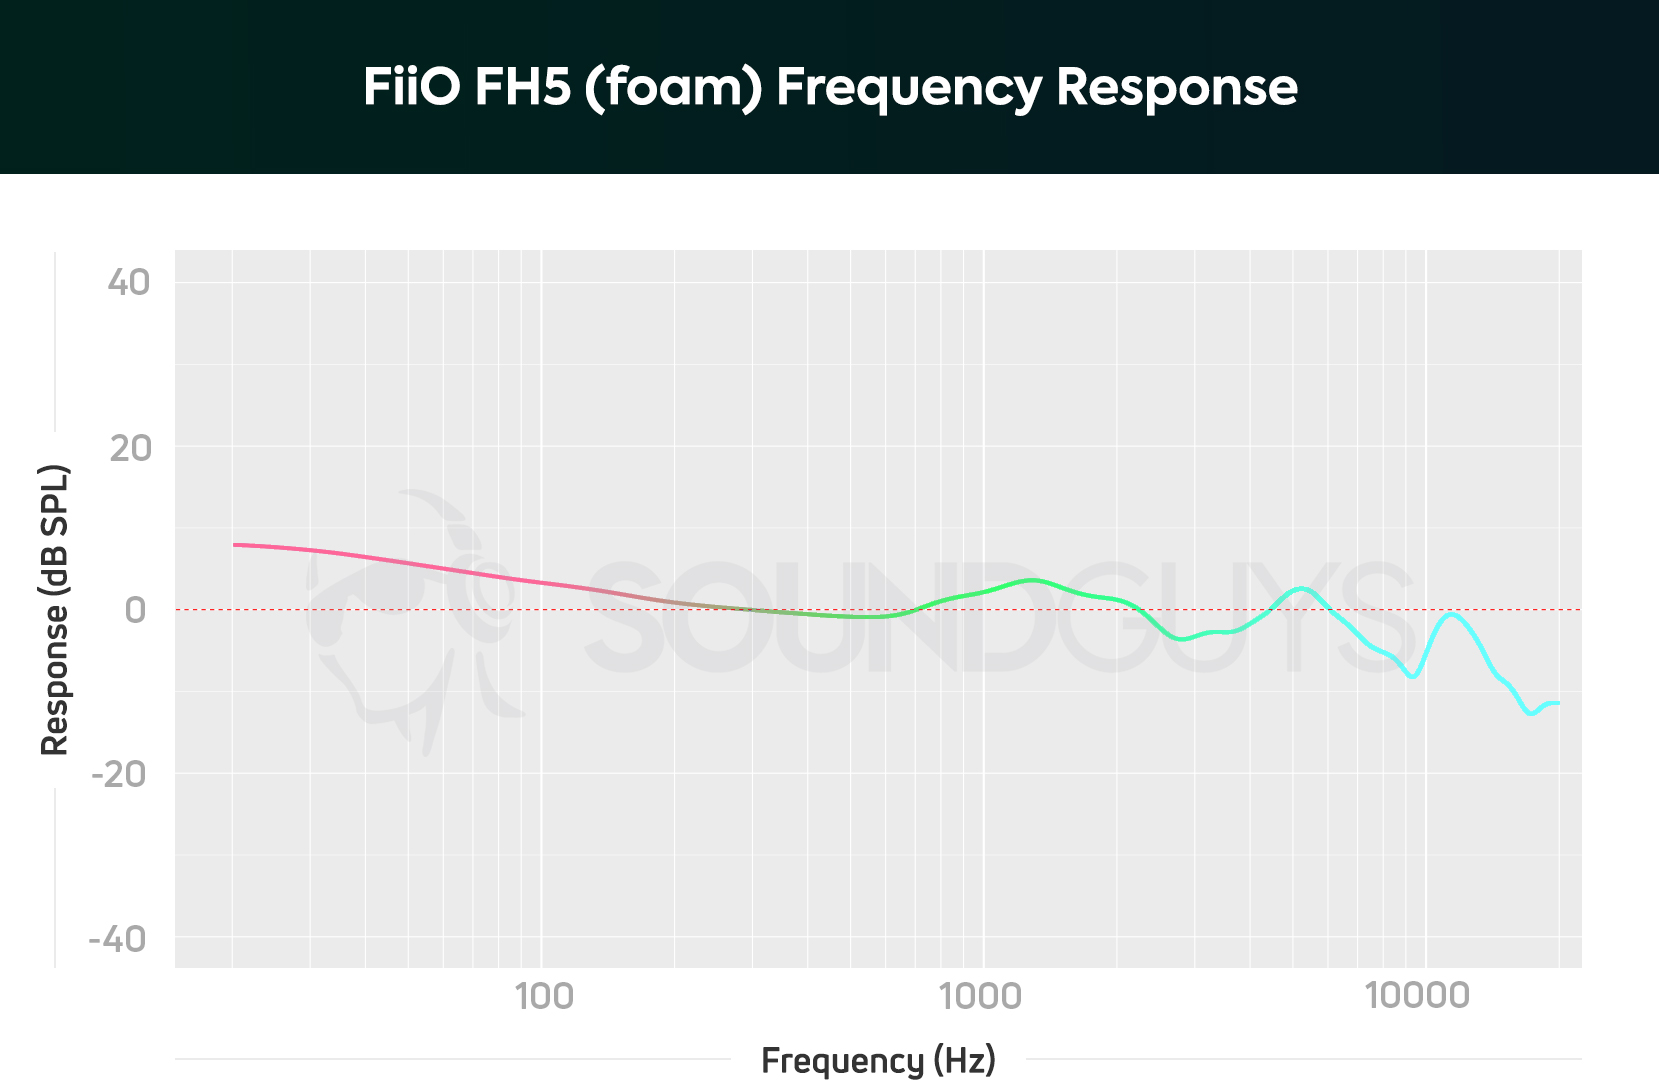 A chart depicts the FiiO FH5 frequency response with the foam ear tips, which slightly amplifies bass notes.